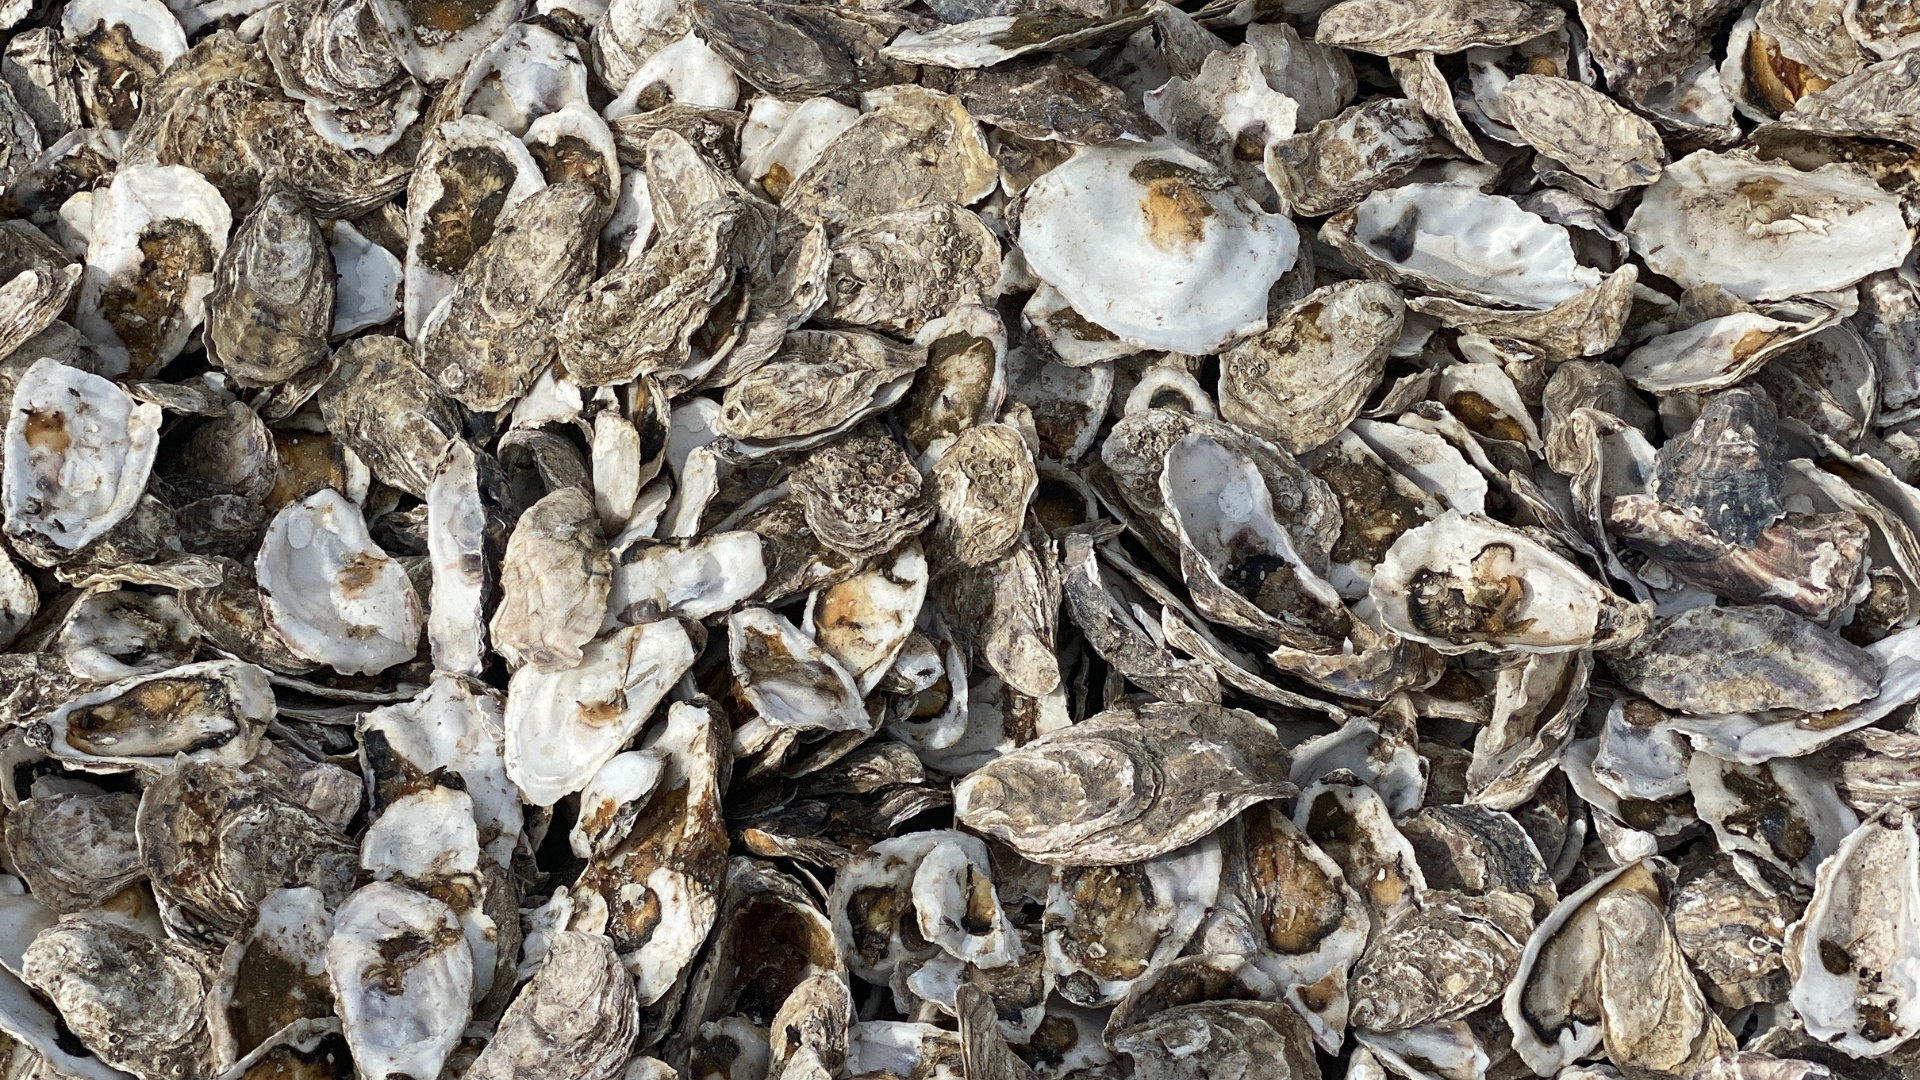 University of Gent Research Reveals Optimal Locations for Offshore Oyster Habitat Restoration under UNITED's Project